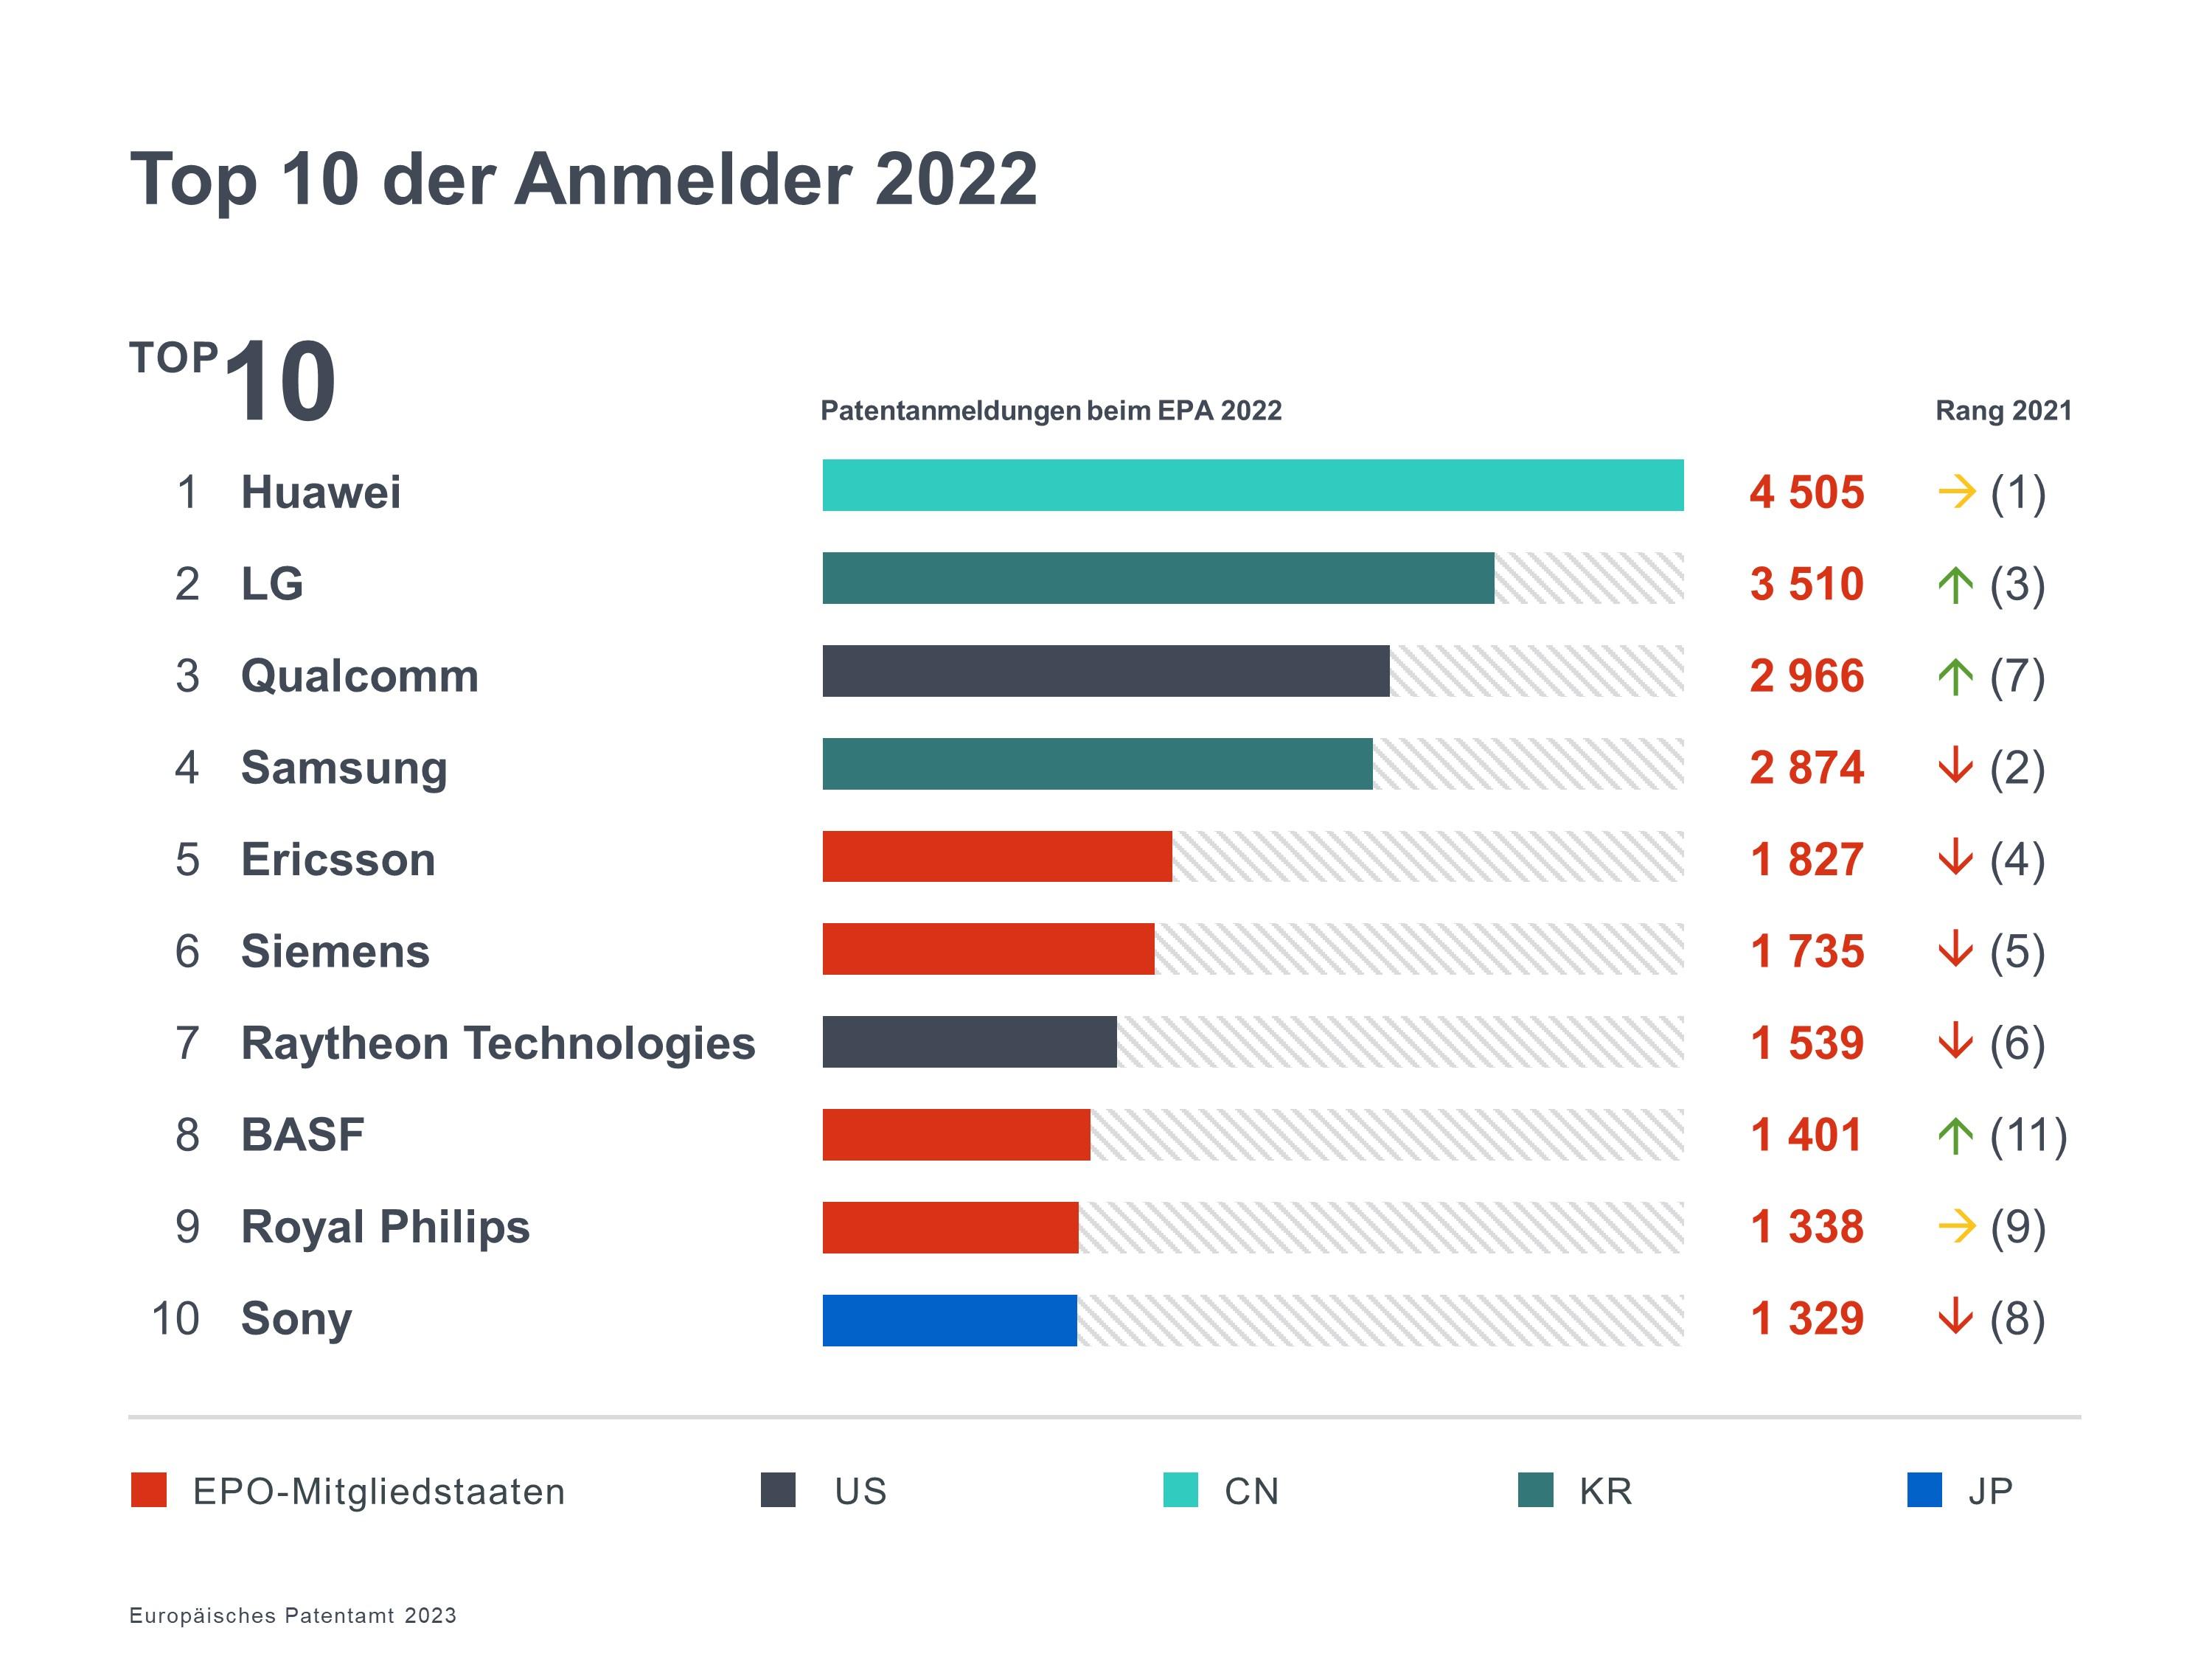 Top ten applicants 2022. First place Huawei with 4505 applications in 2022.